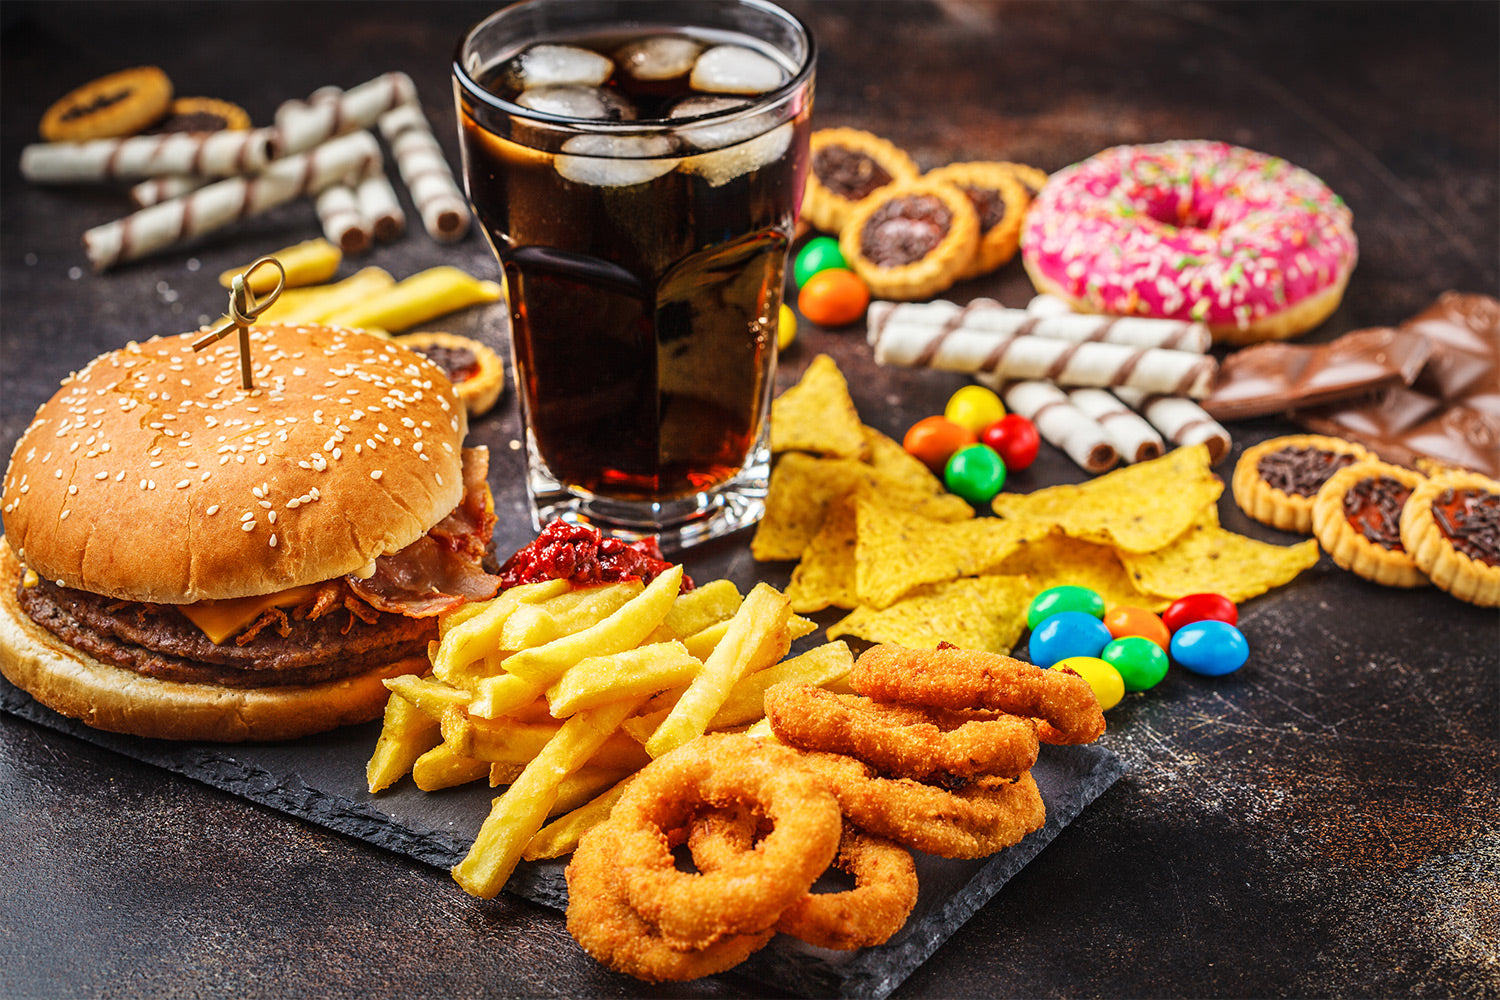 Junk food spread out on a photodrop background